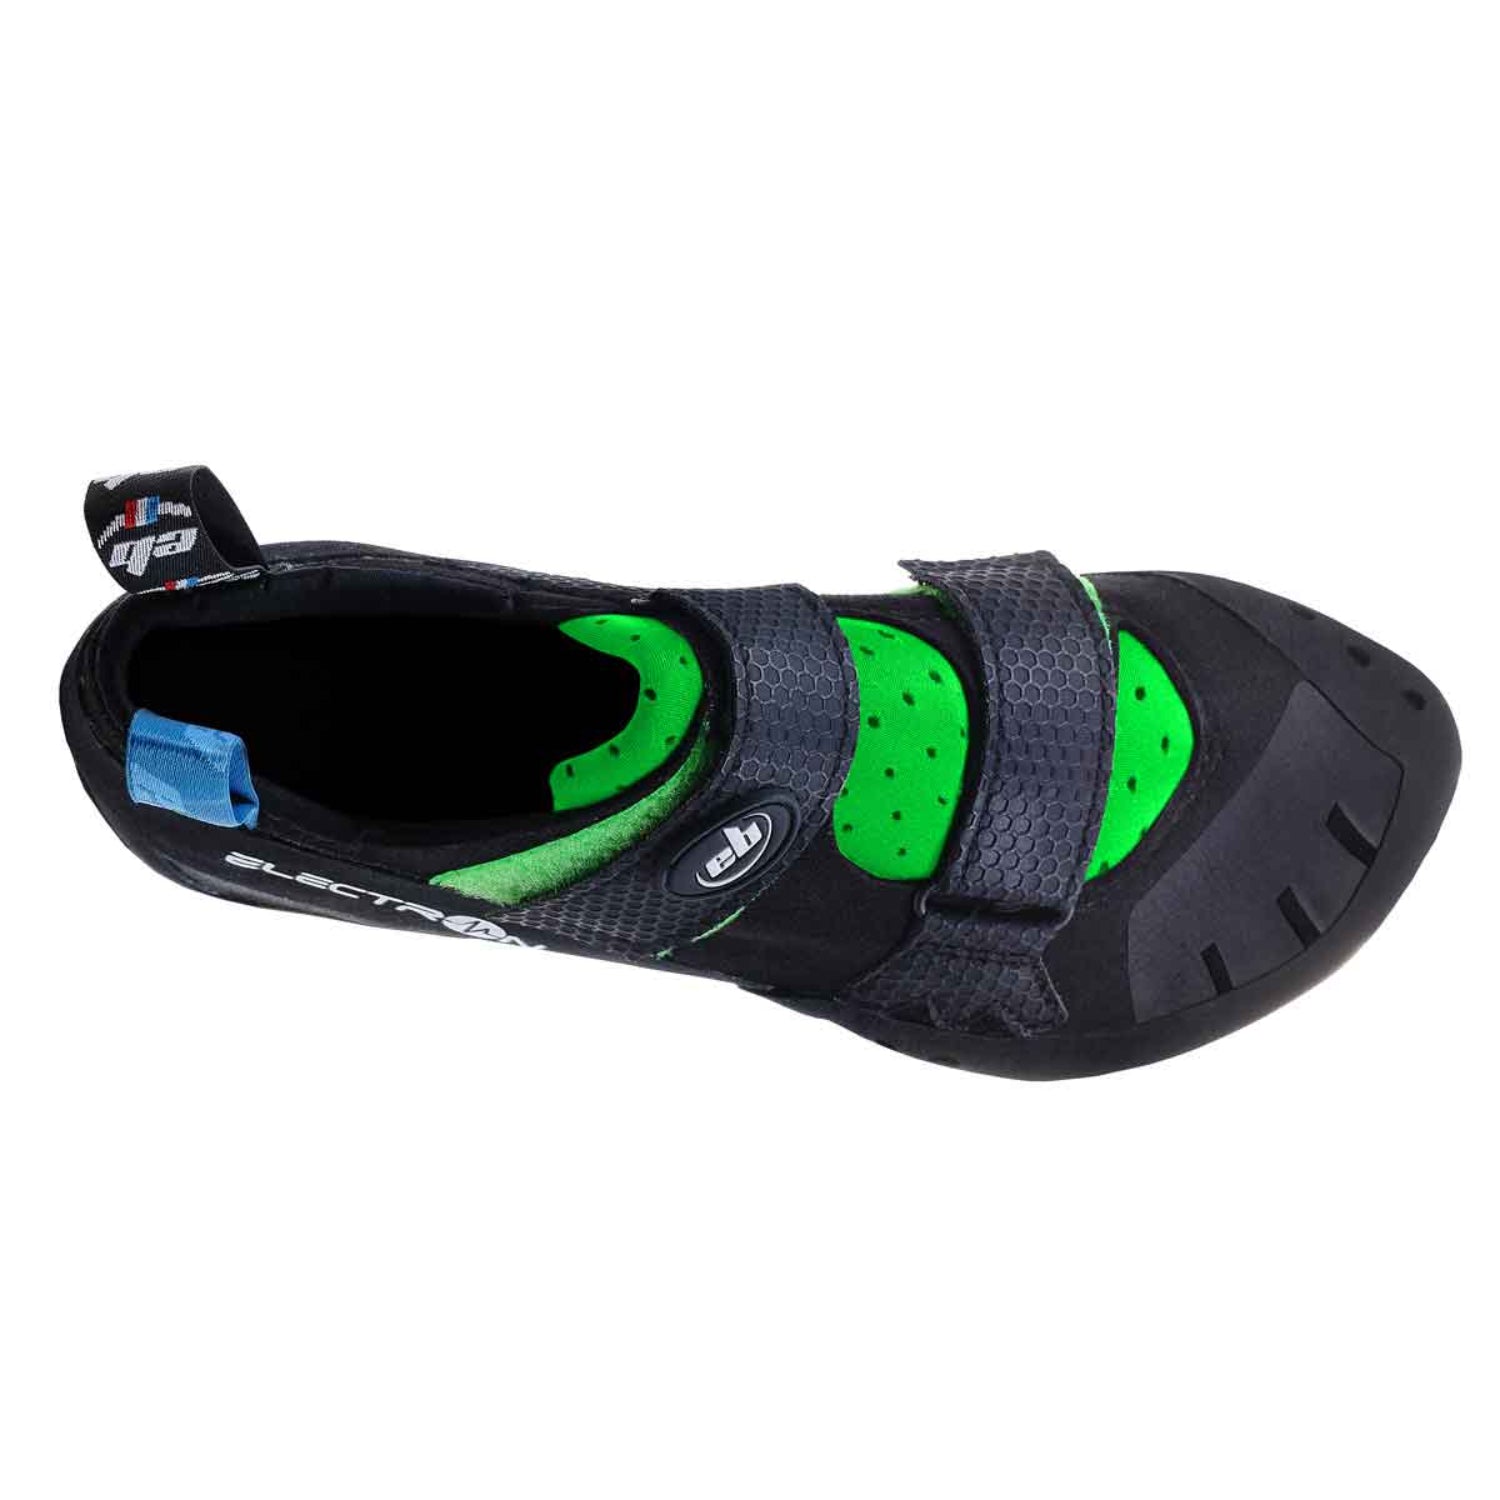 EB Electron climbing shoes from the side showing logo and straps